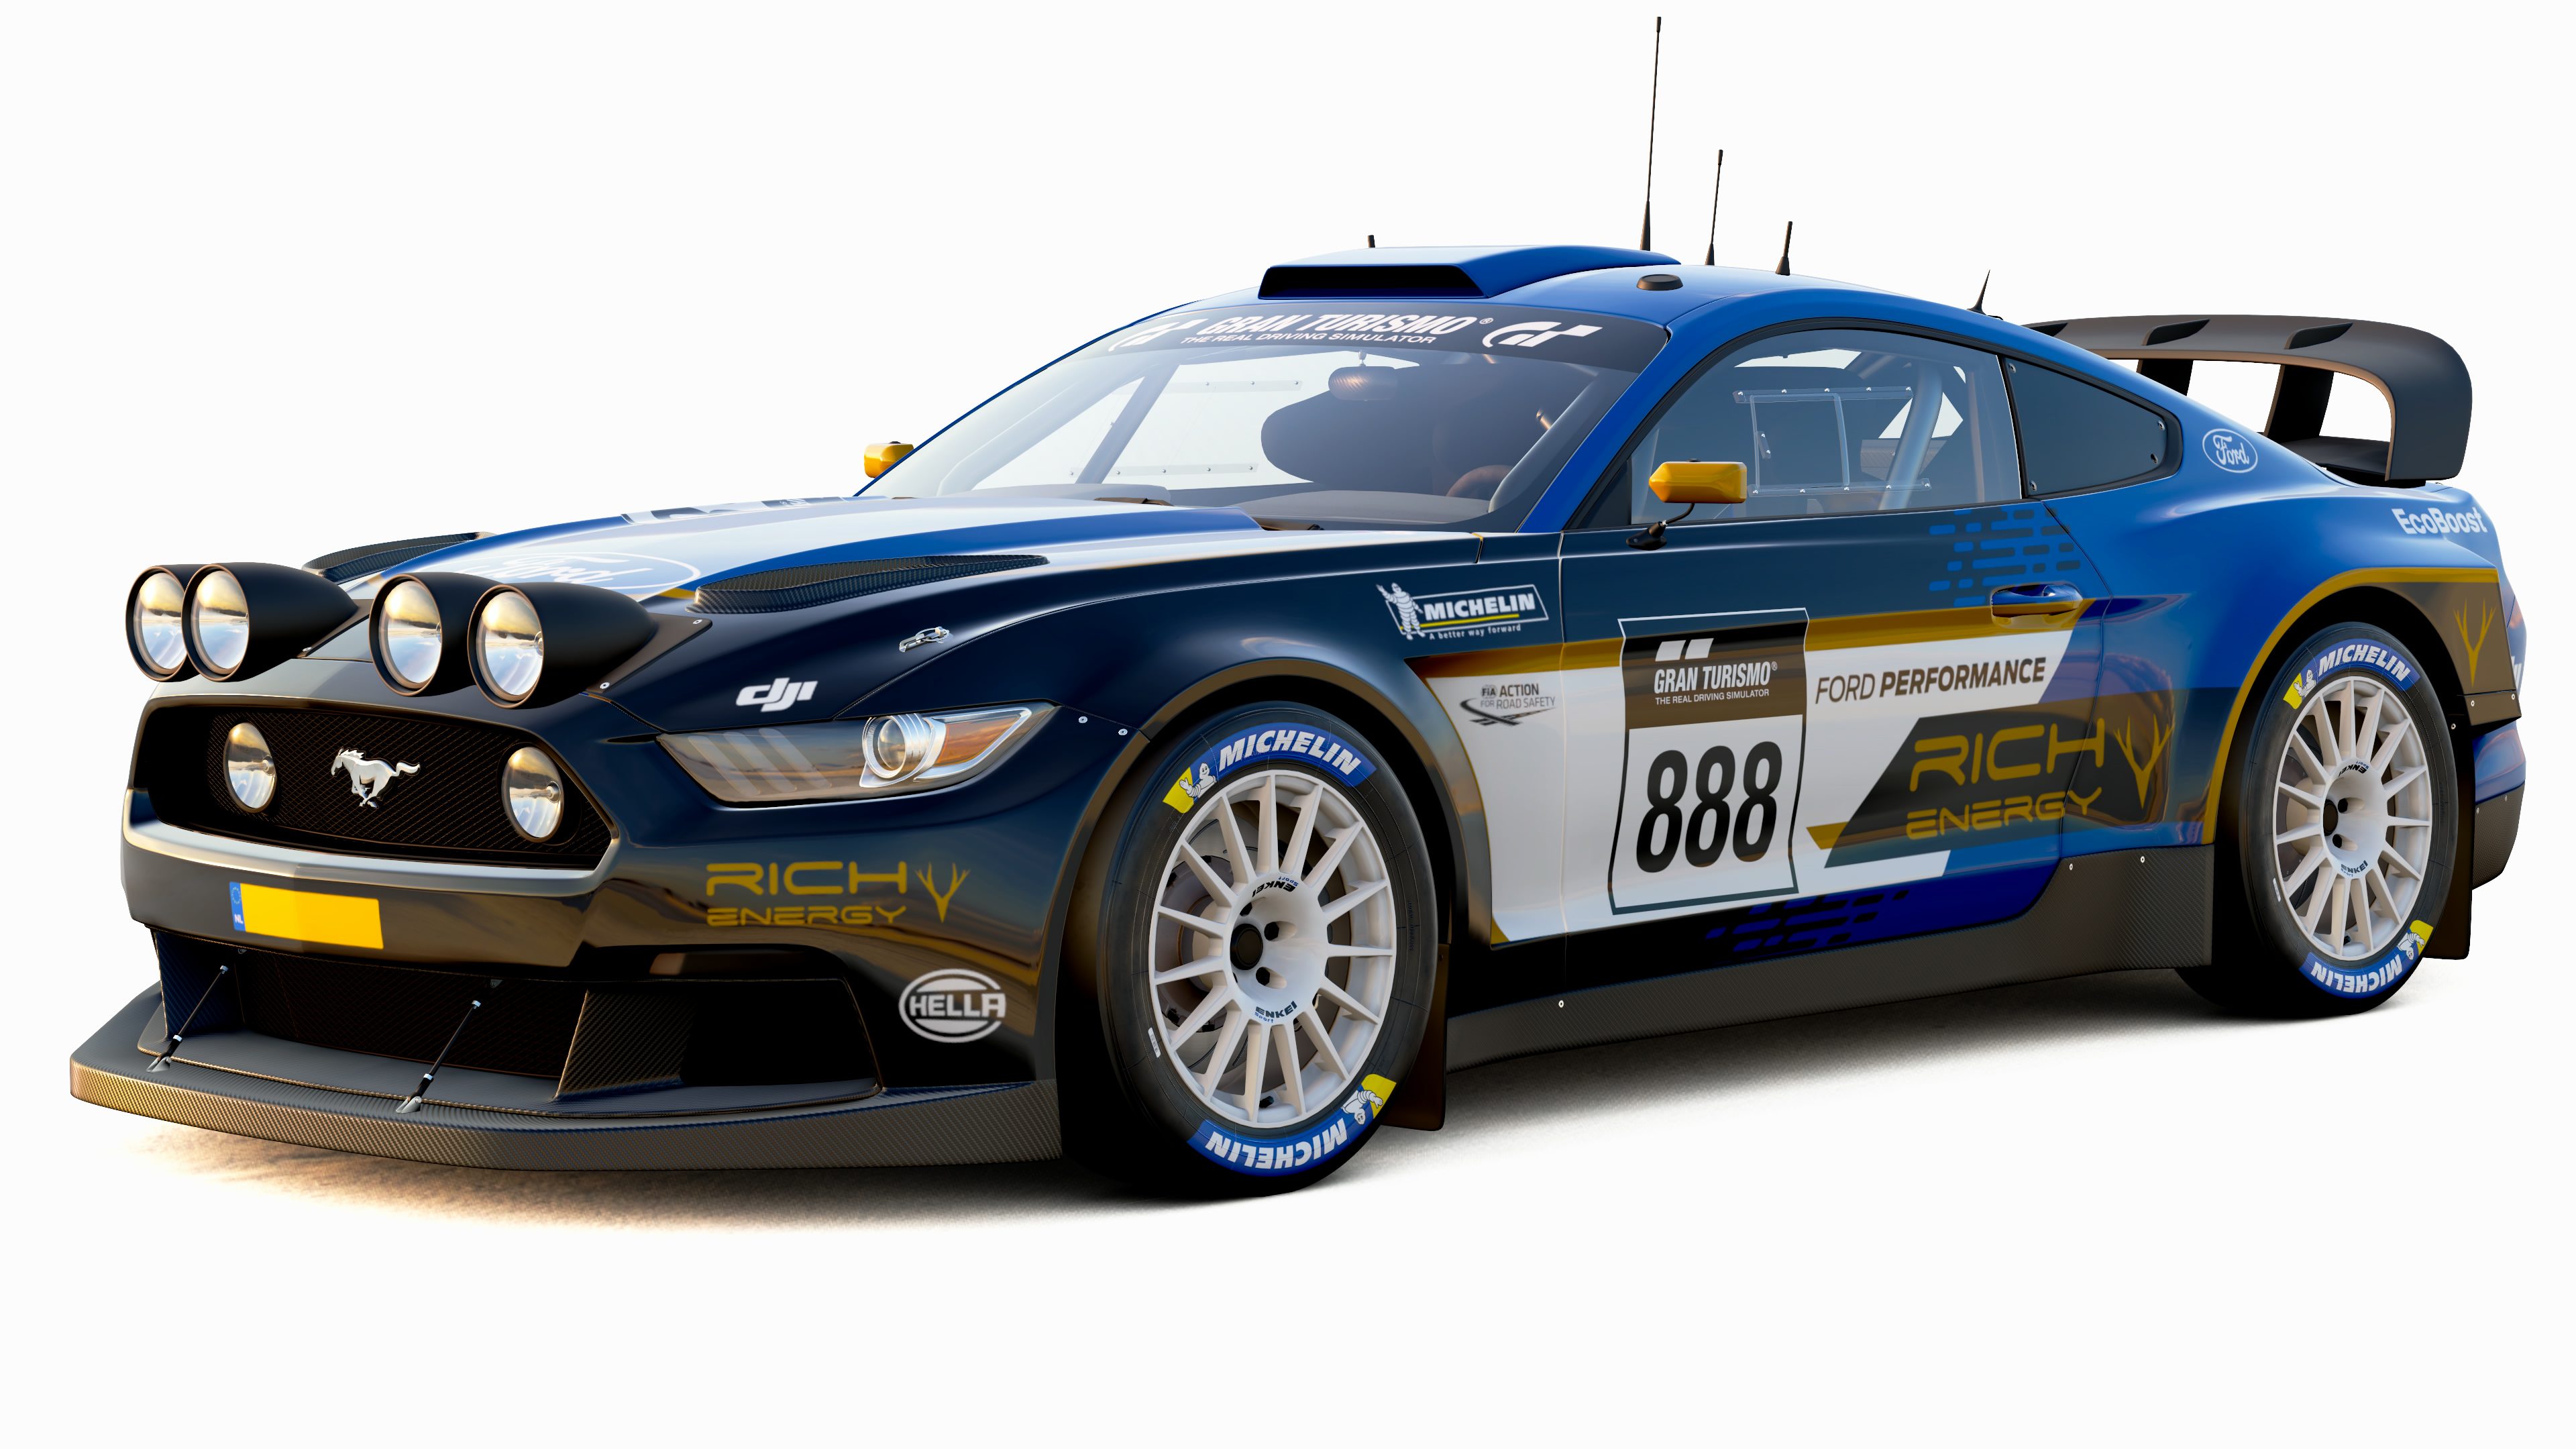 Rich energy Ford WRT - front